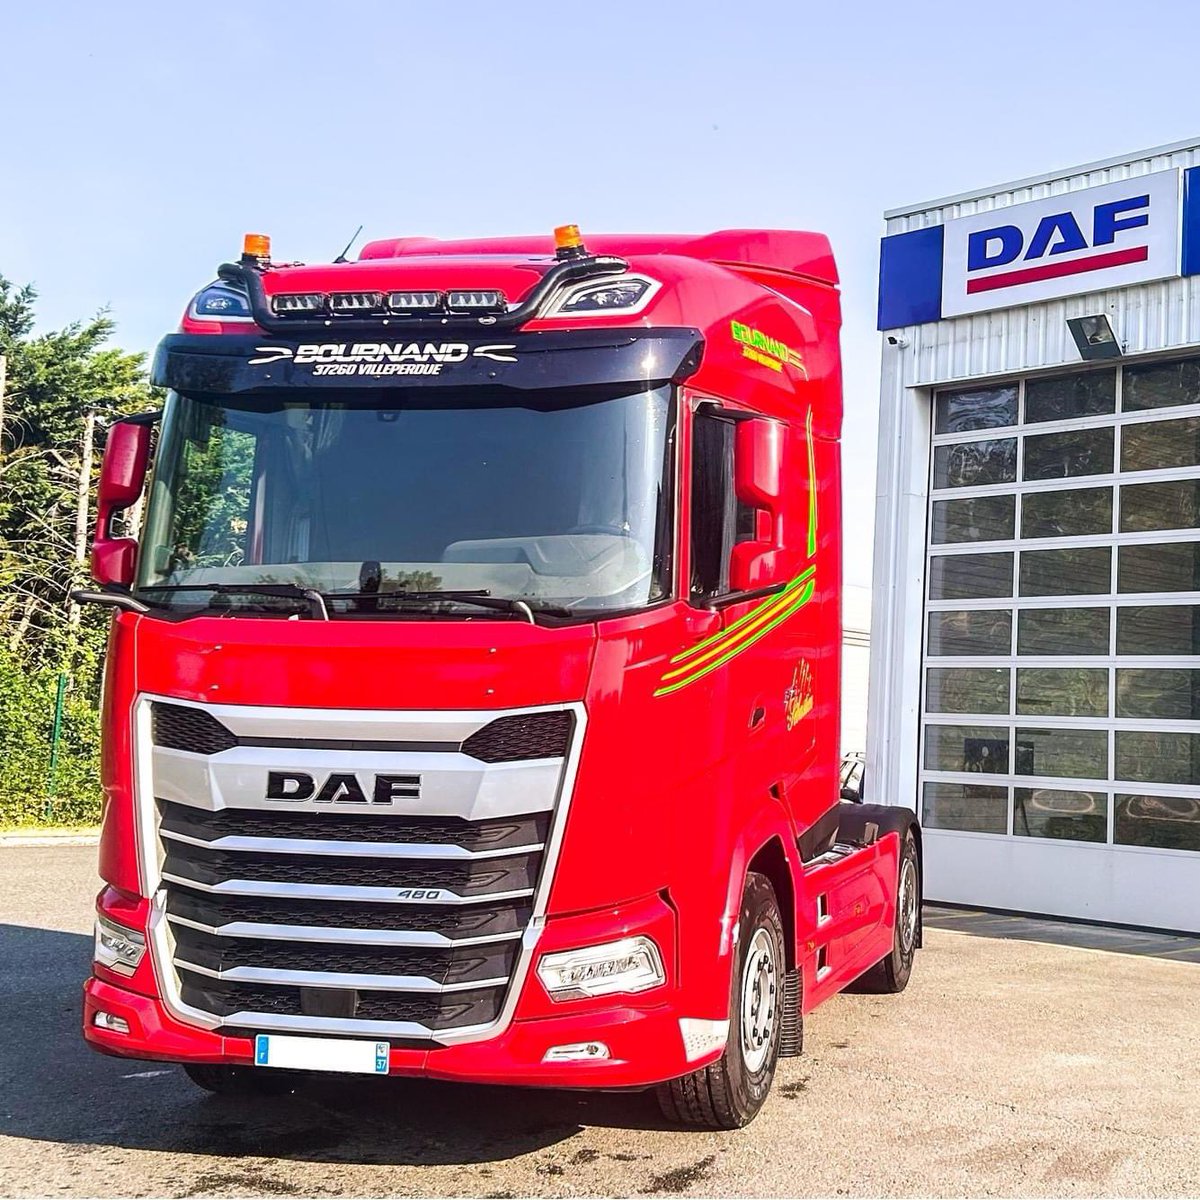 DAF XG
Bournand
📸 Groupe Poids Lourds Synergies